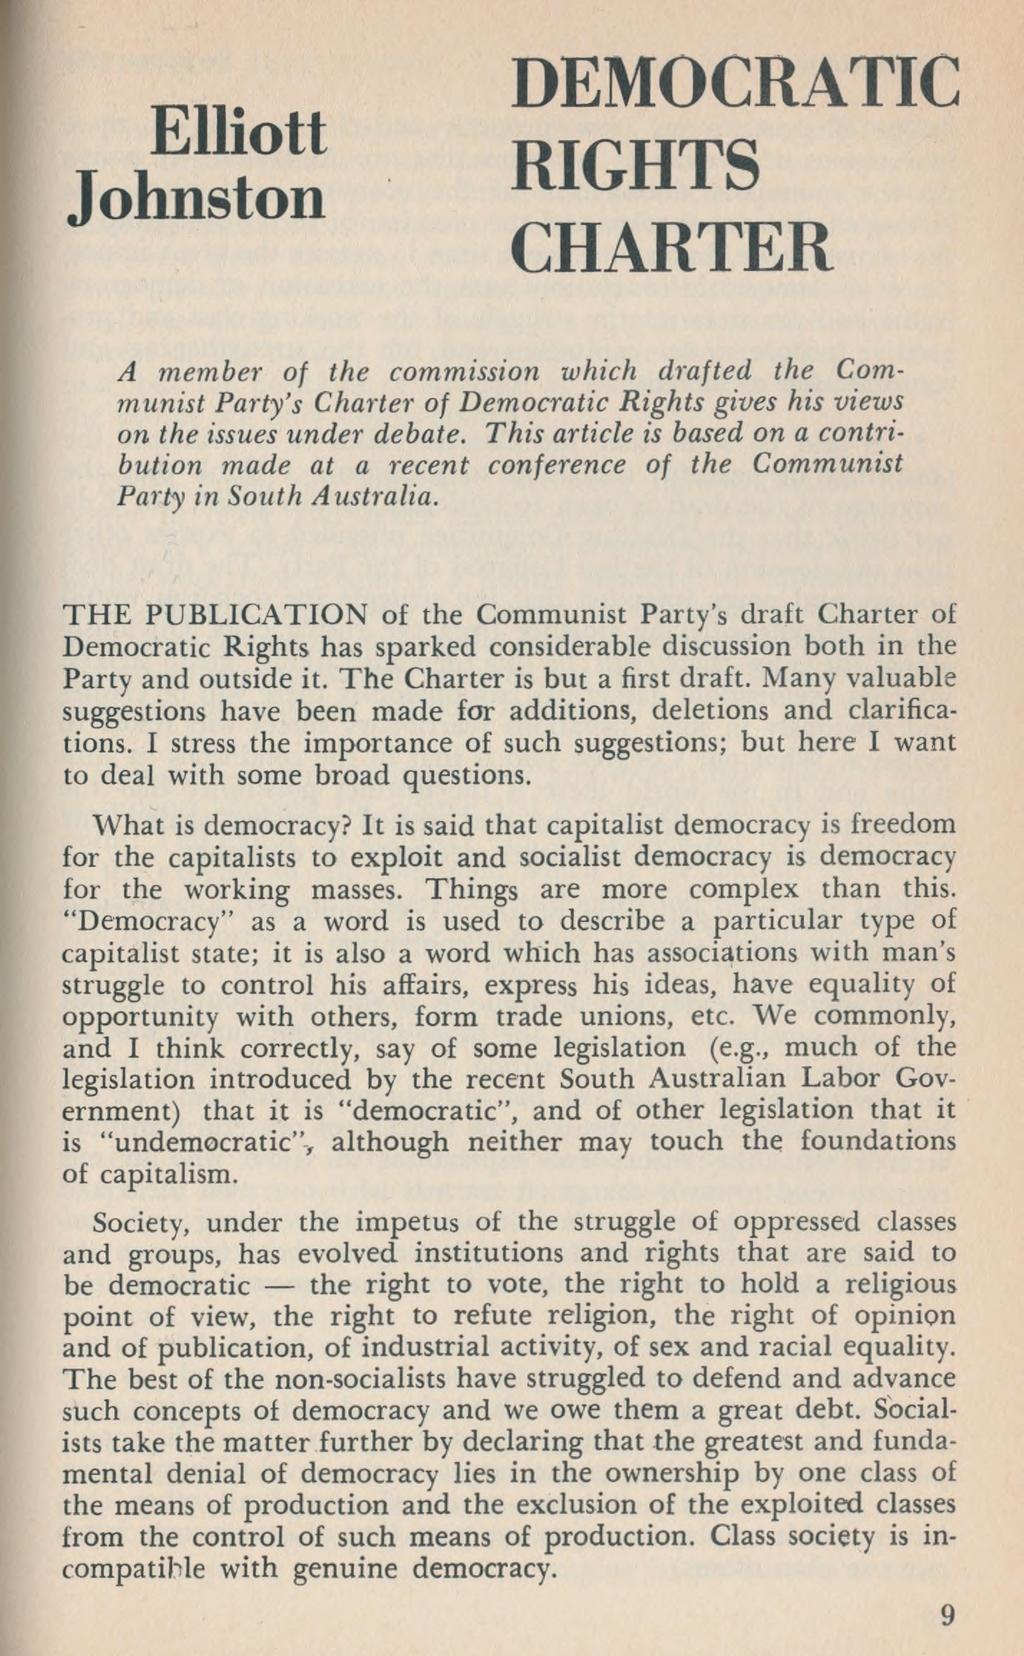 Elliott Johnston DEMOCRATIC RIGHTS CHARTER A member of the commission which drafted the Communist Party s Charter of Democratic Rights gives his views on the issues under debate.